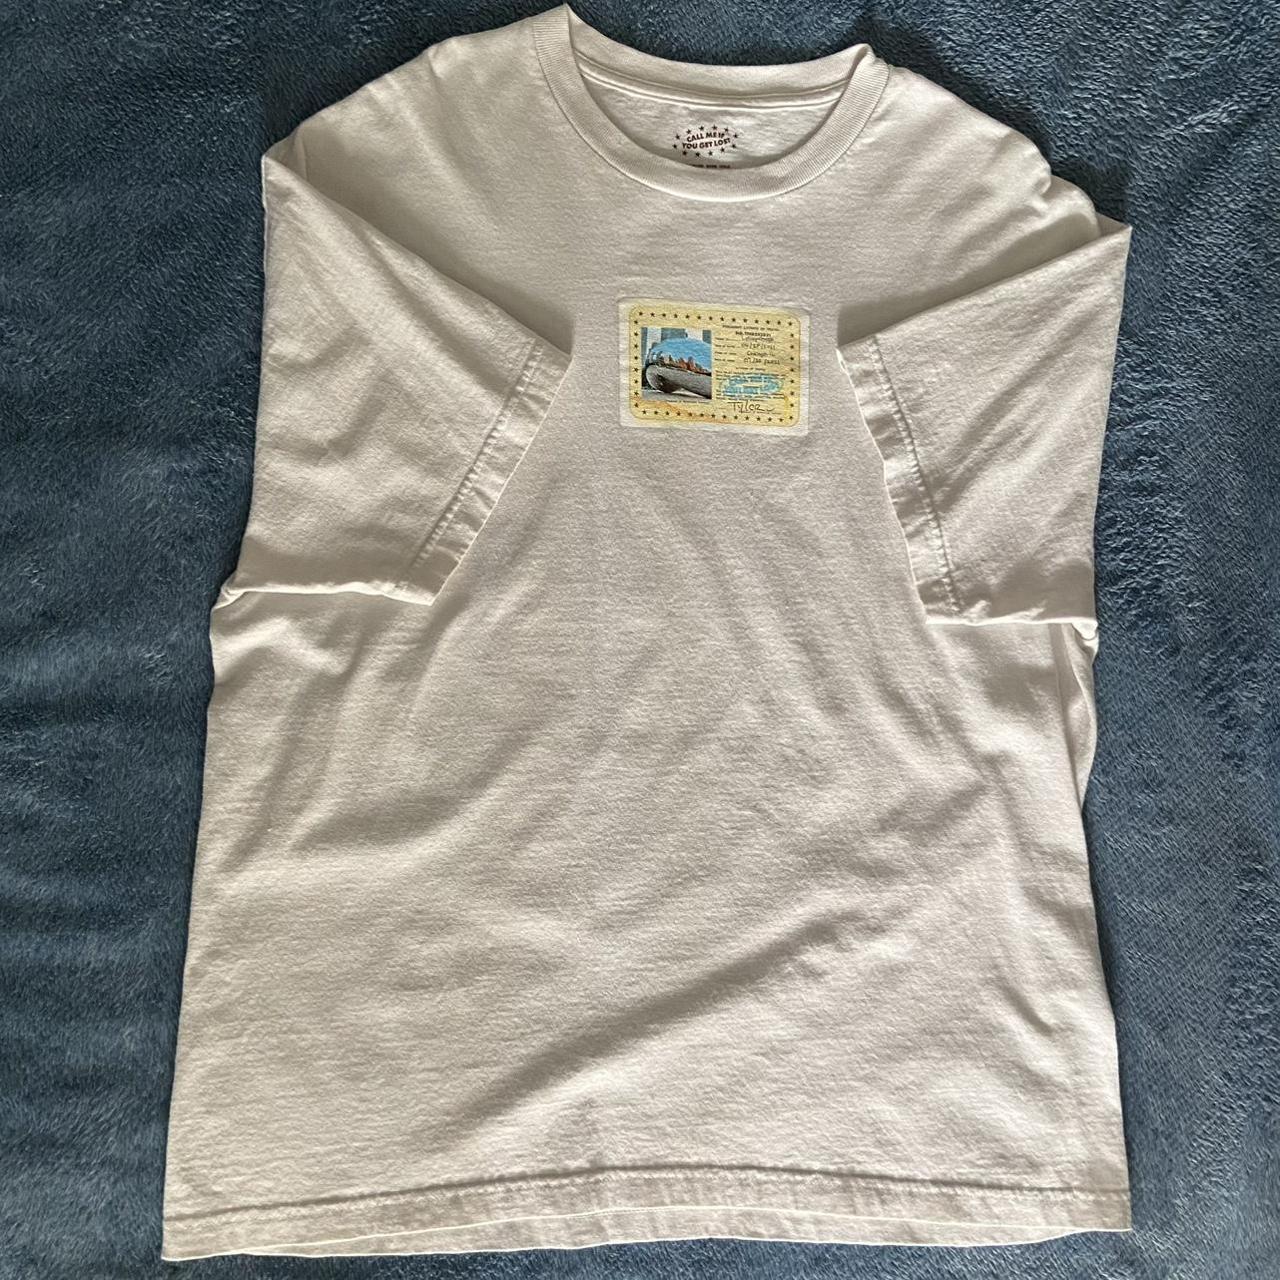 Golf Wang Call Me If You Get Lost t-shirt Tyler the... - Depop